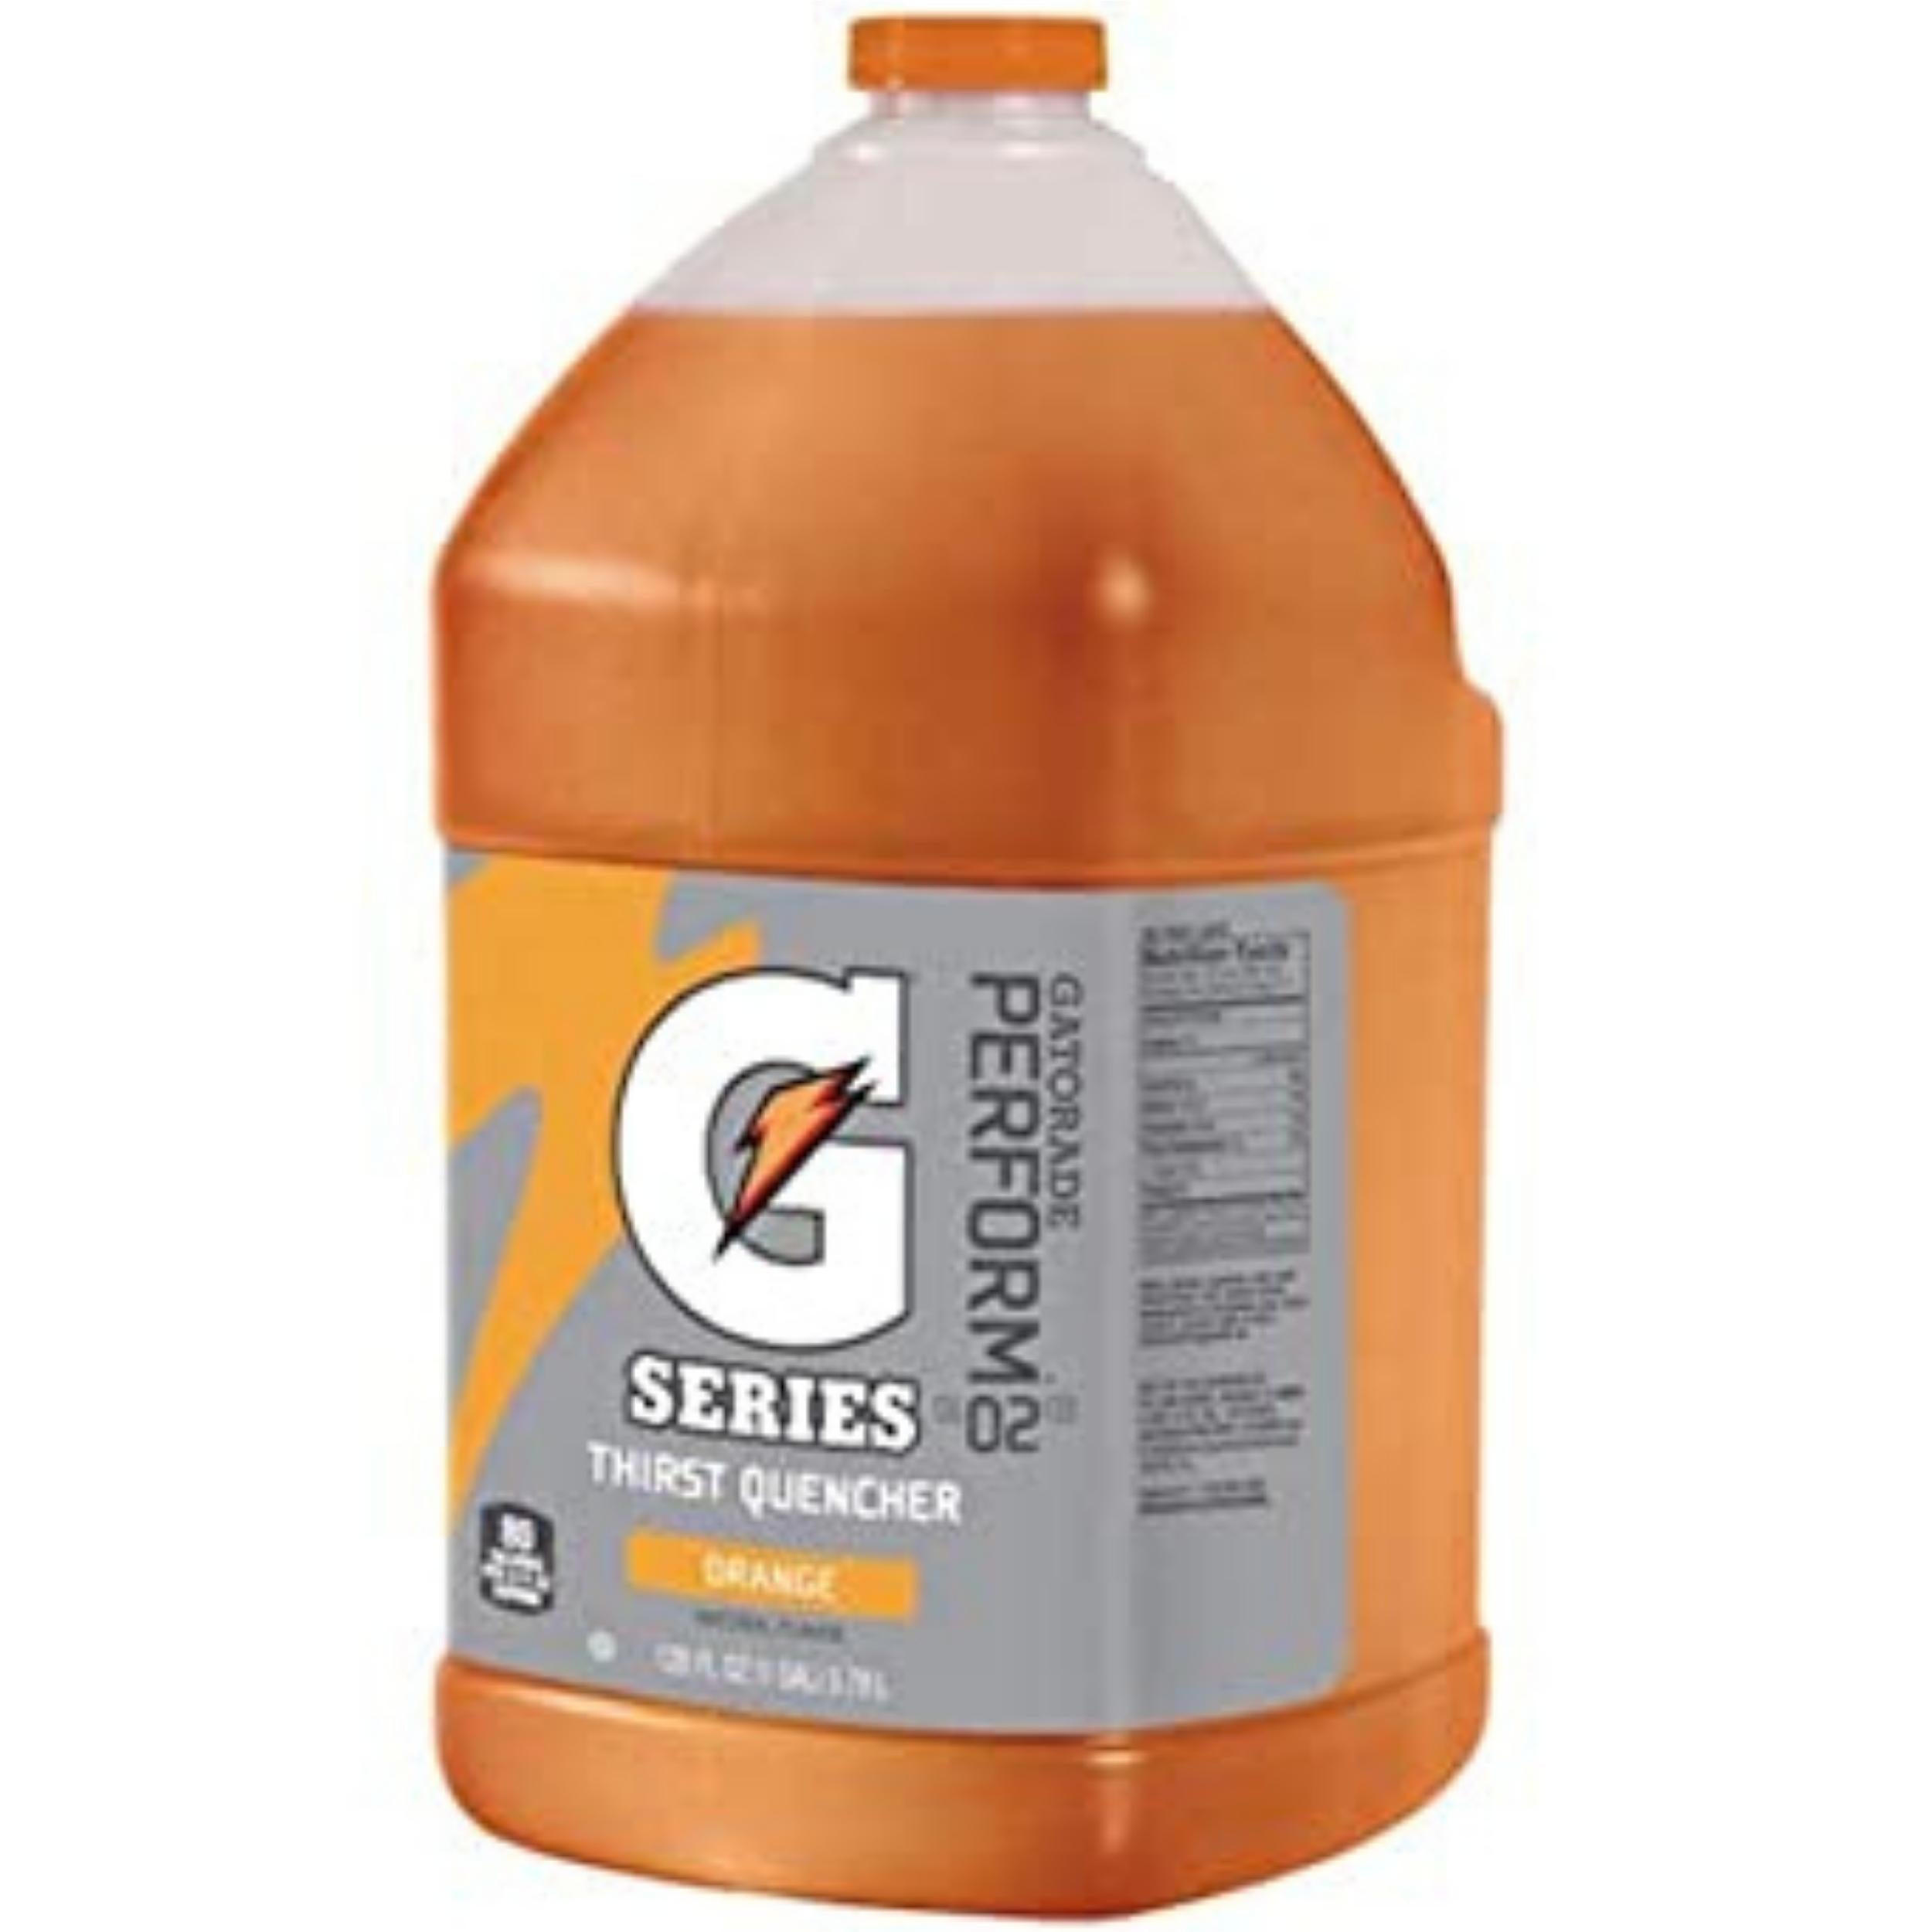 GATORADE- Fierce Thirst Quencher Instant Concentrate (MULTIPLE FLAVORS AVAILABLE)